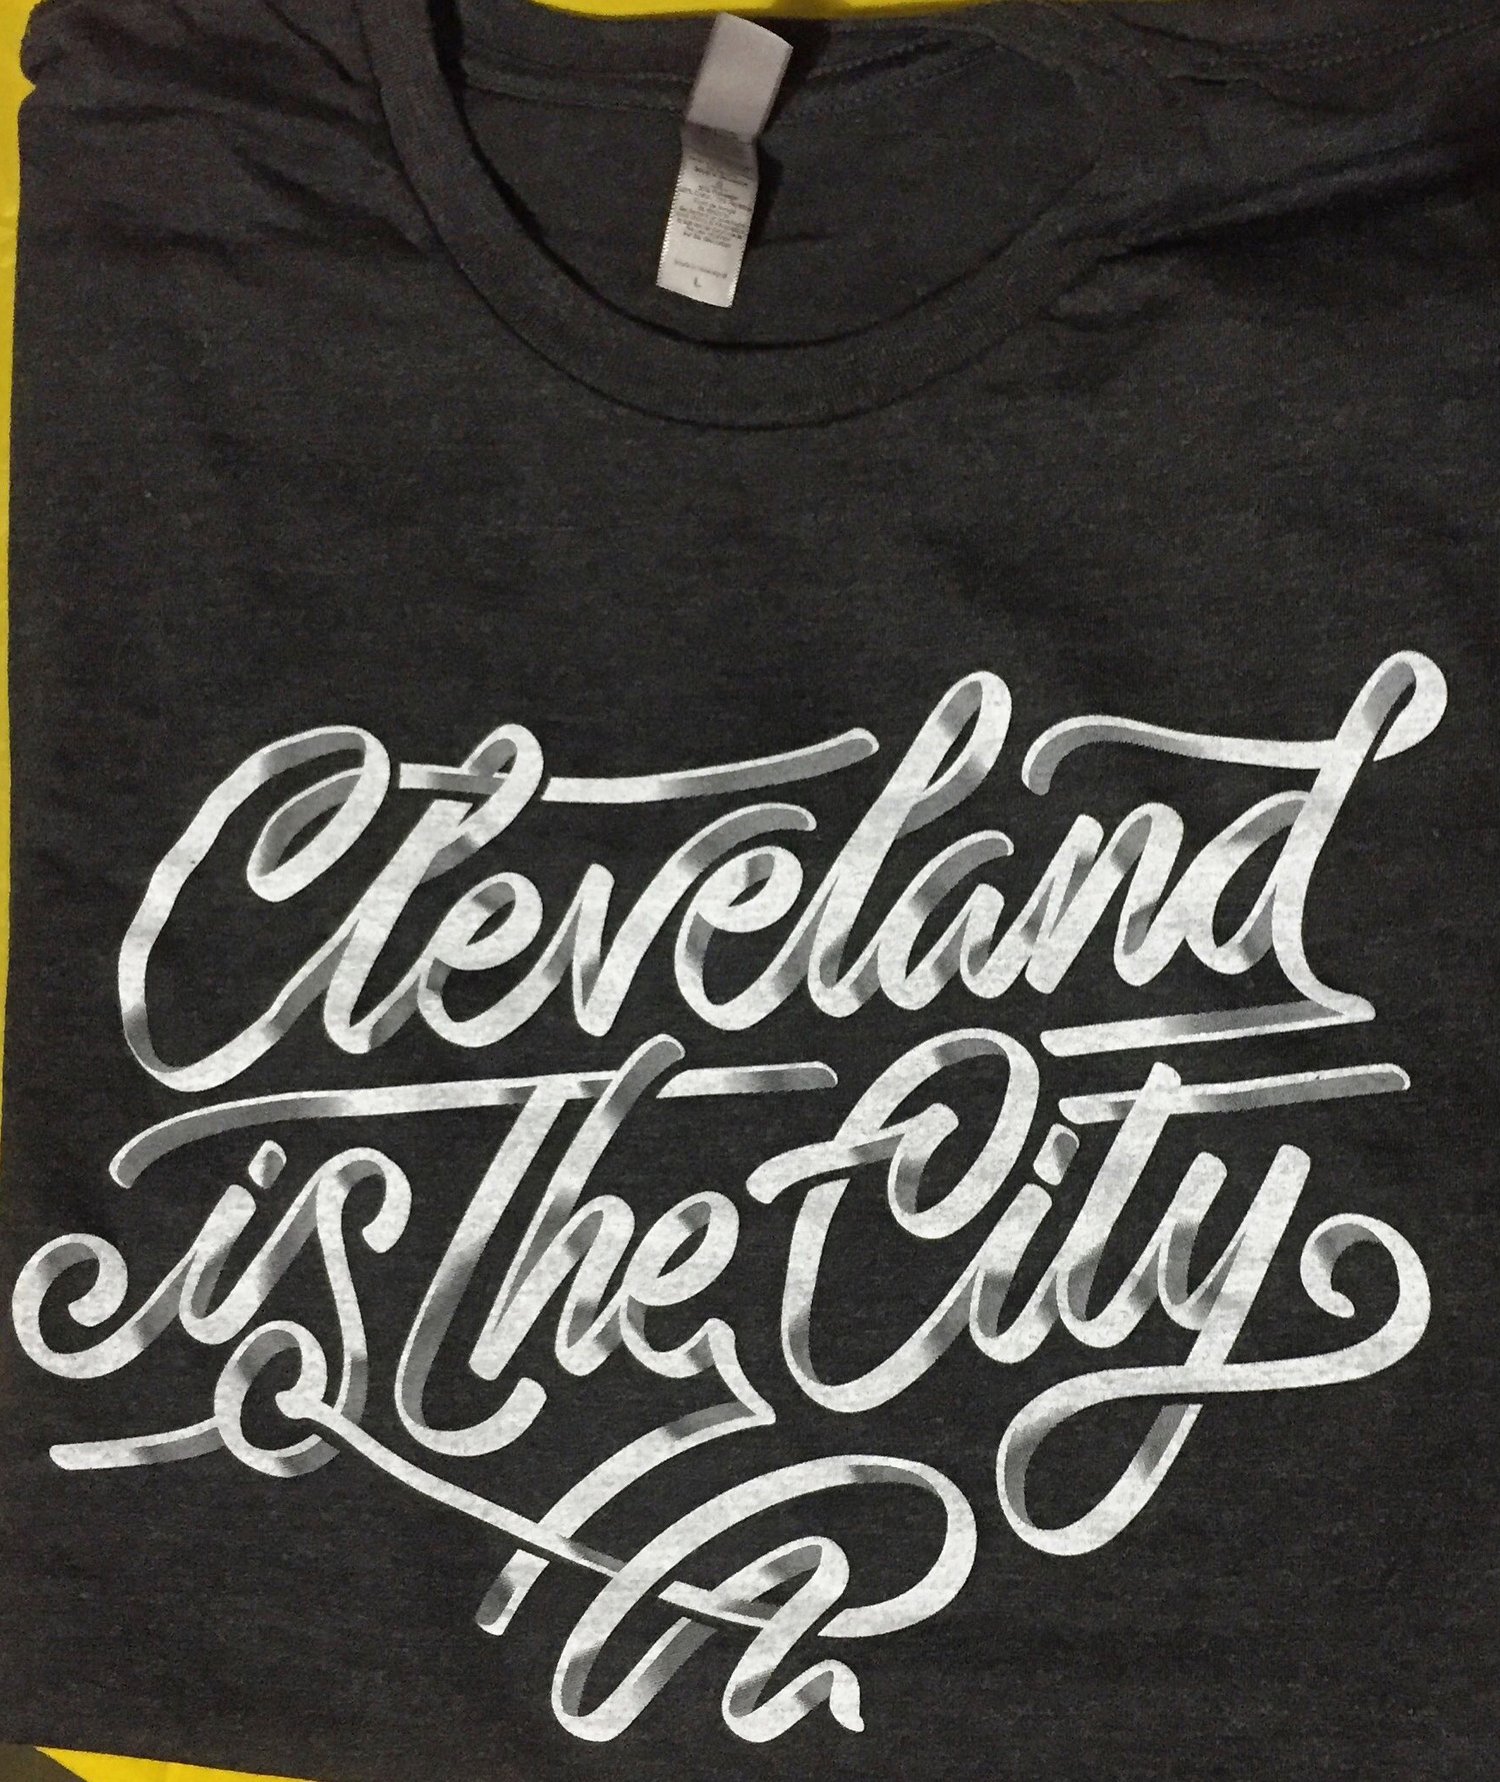 Image of Cleveland is the City